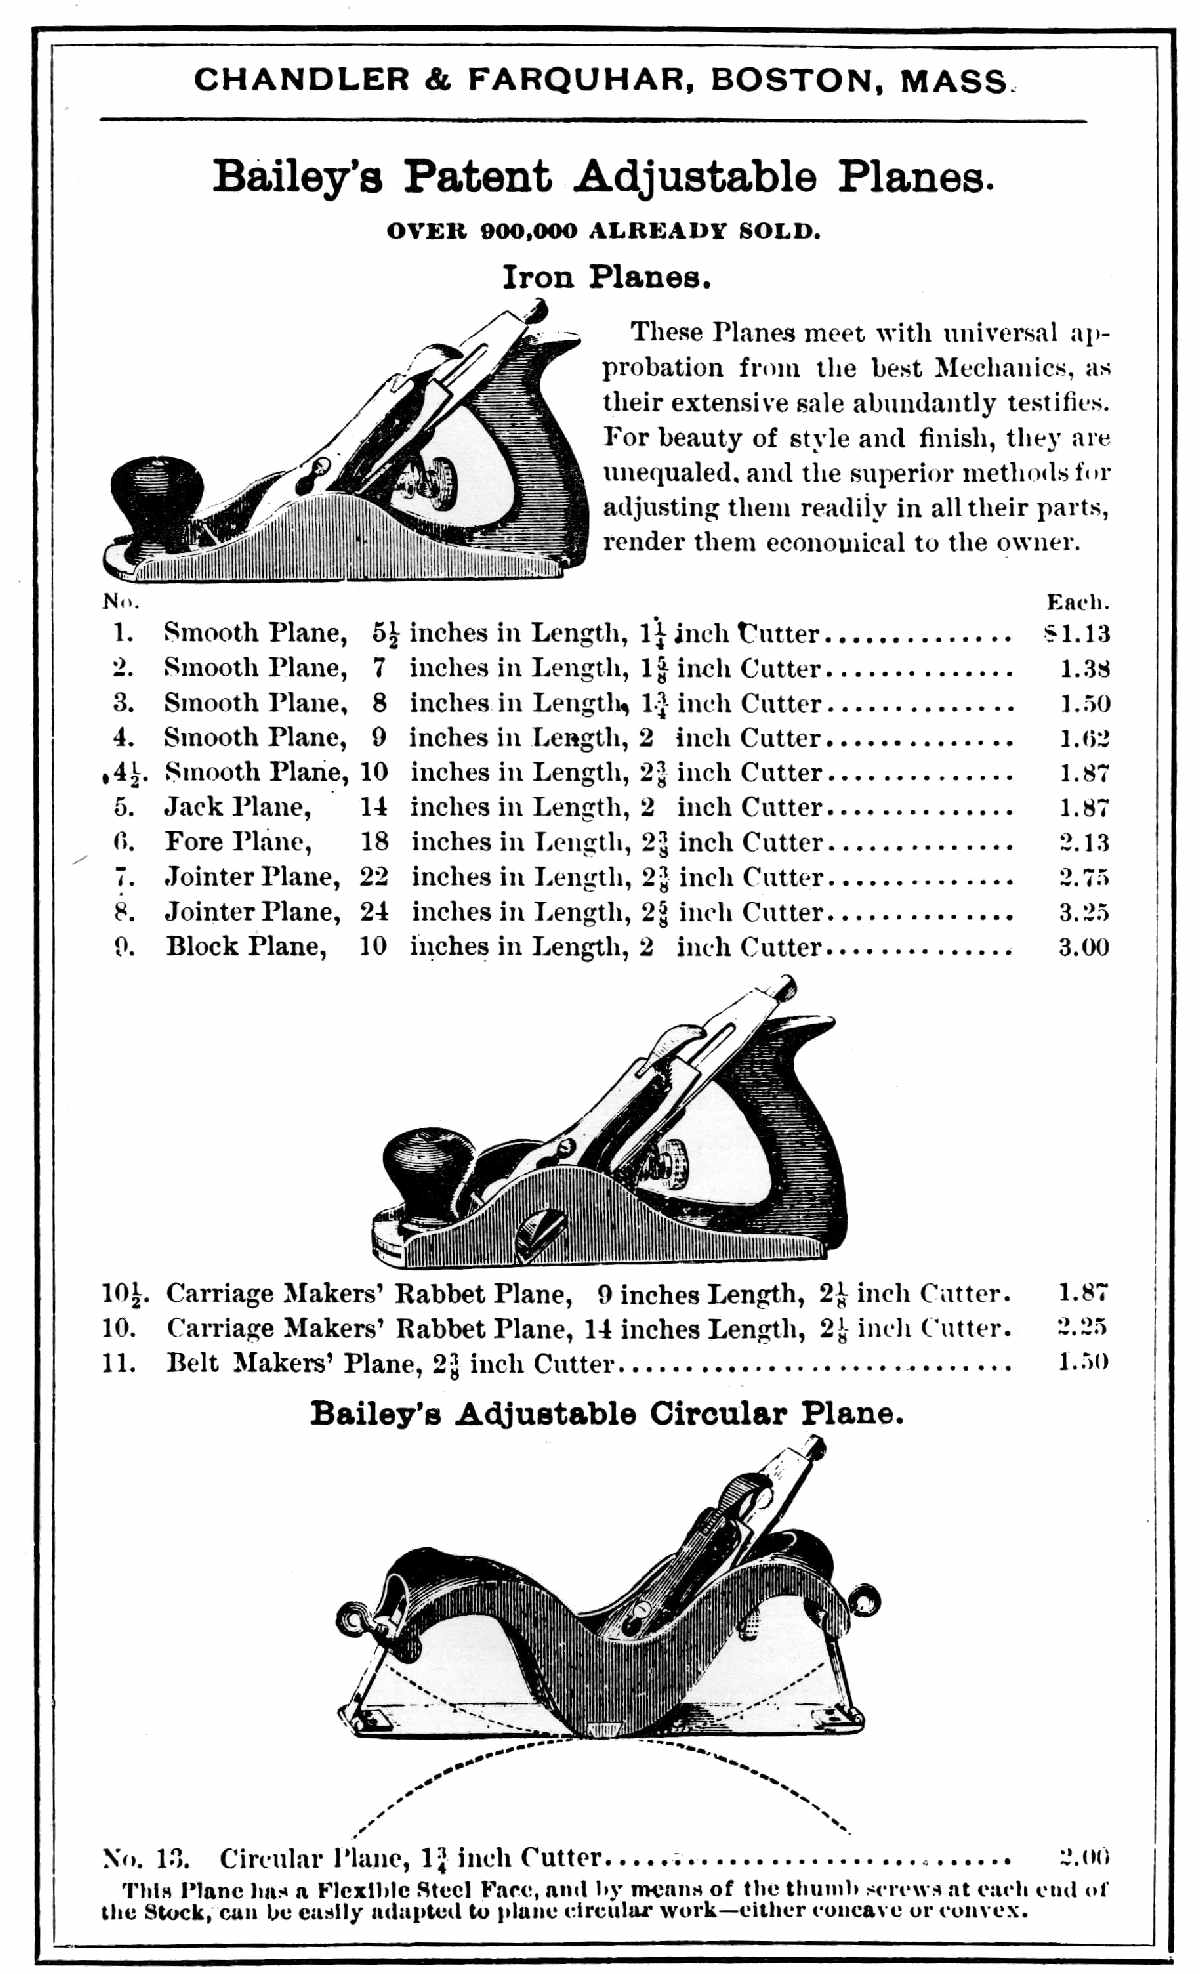 1600-1900 Woodworking Tools